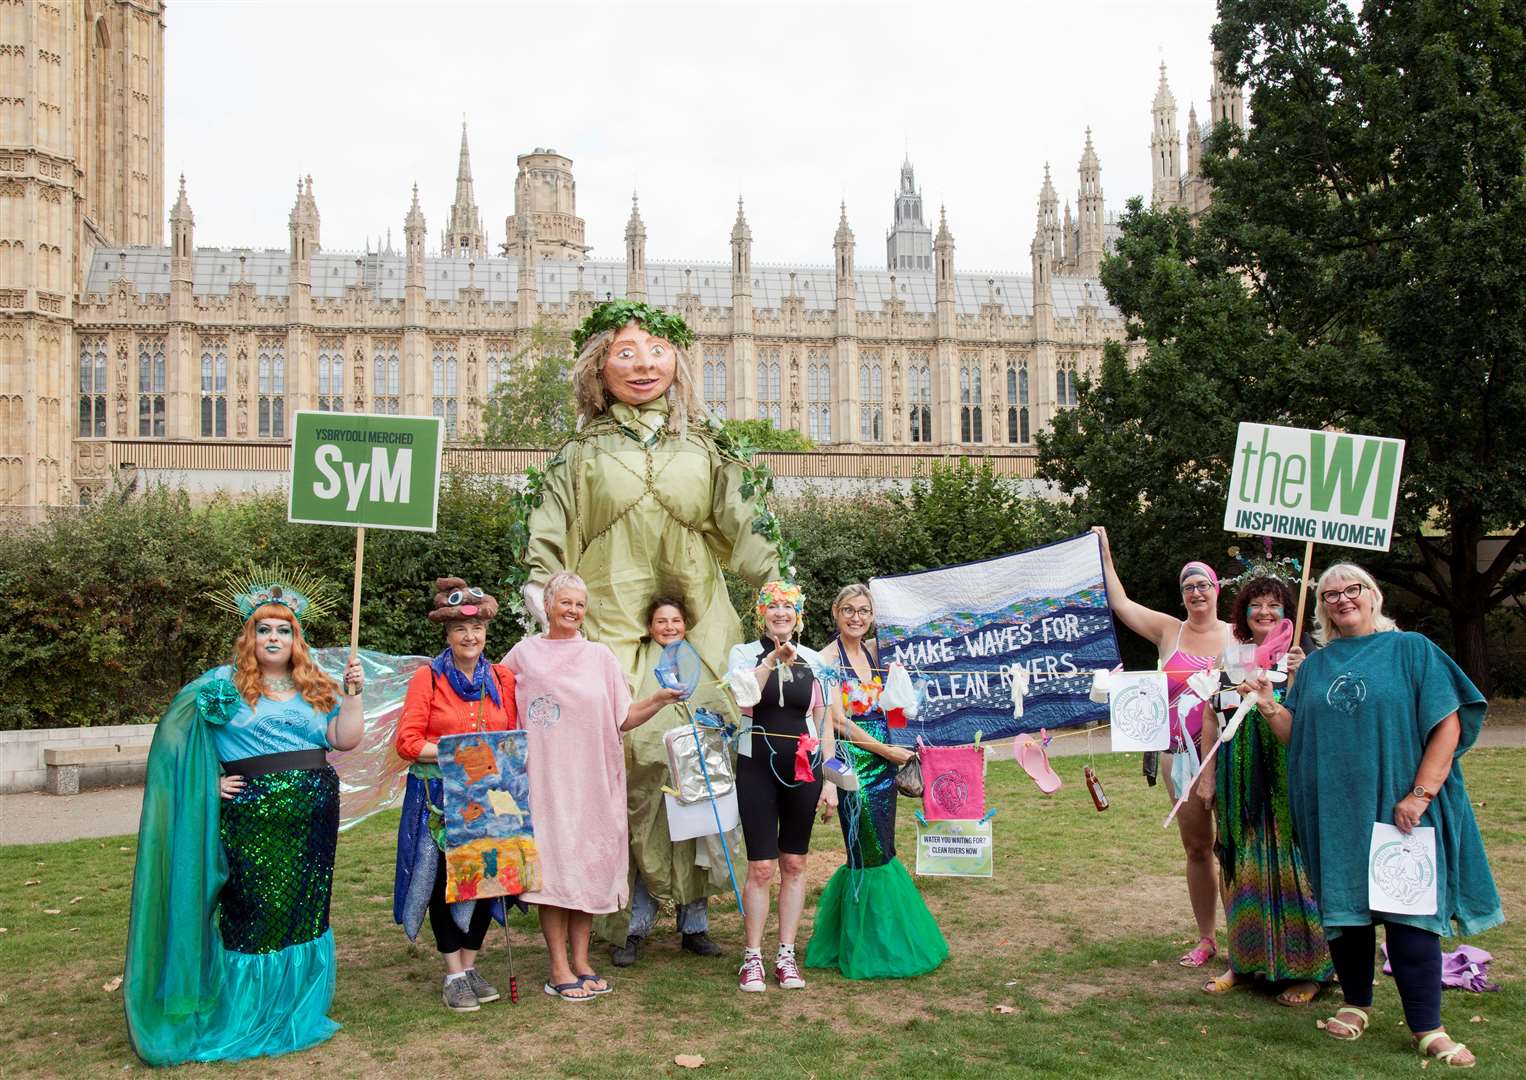 The Margate Women's Institute supported the Clean Rivers campaign in Westminster. Picture: Holly Revell